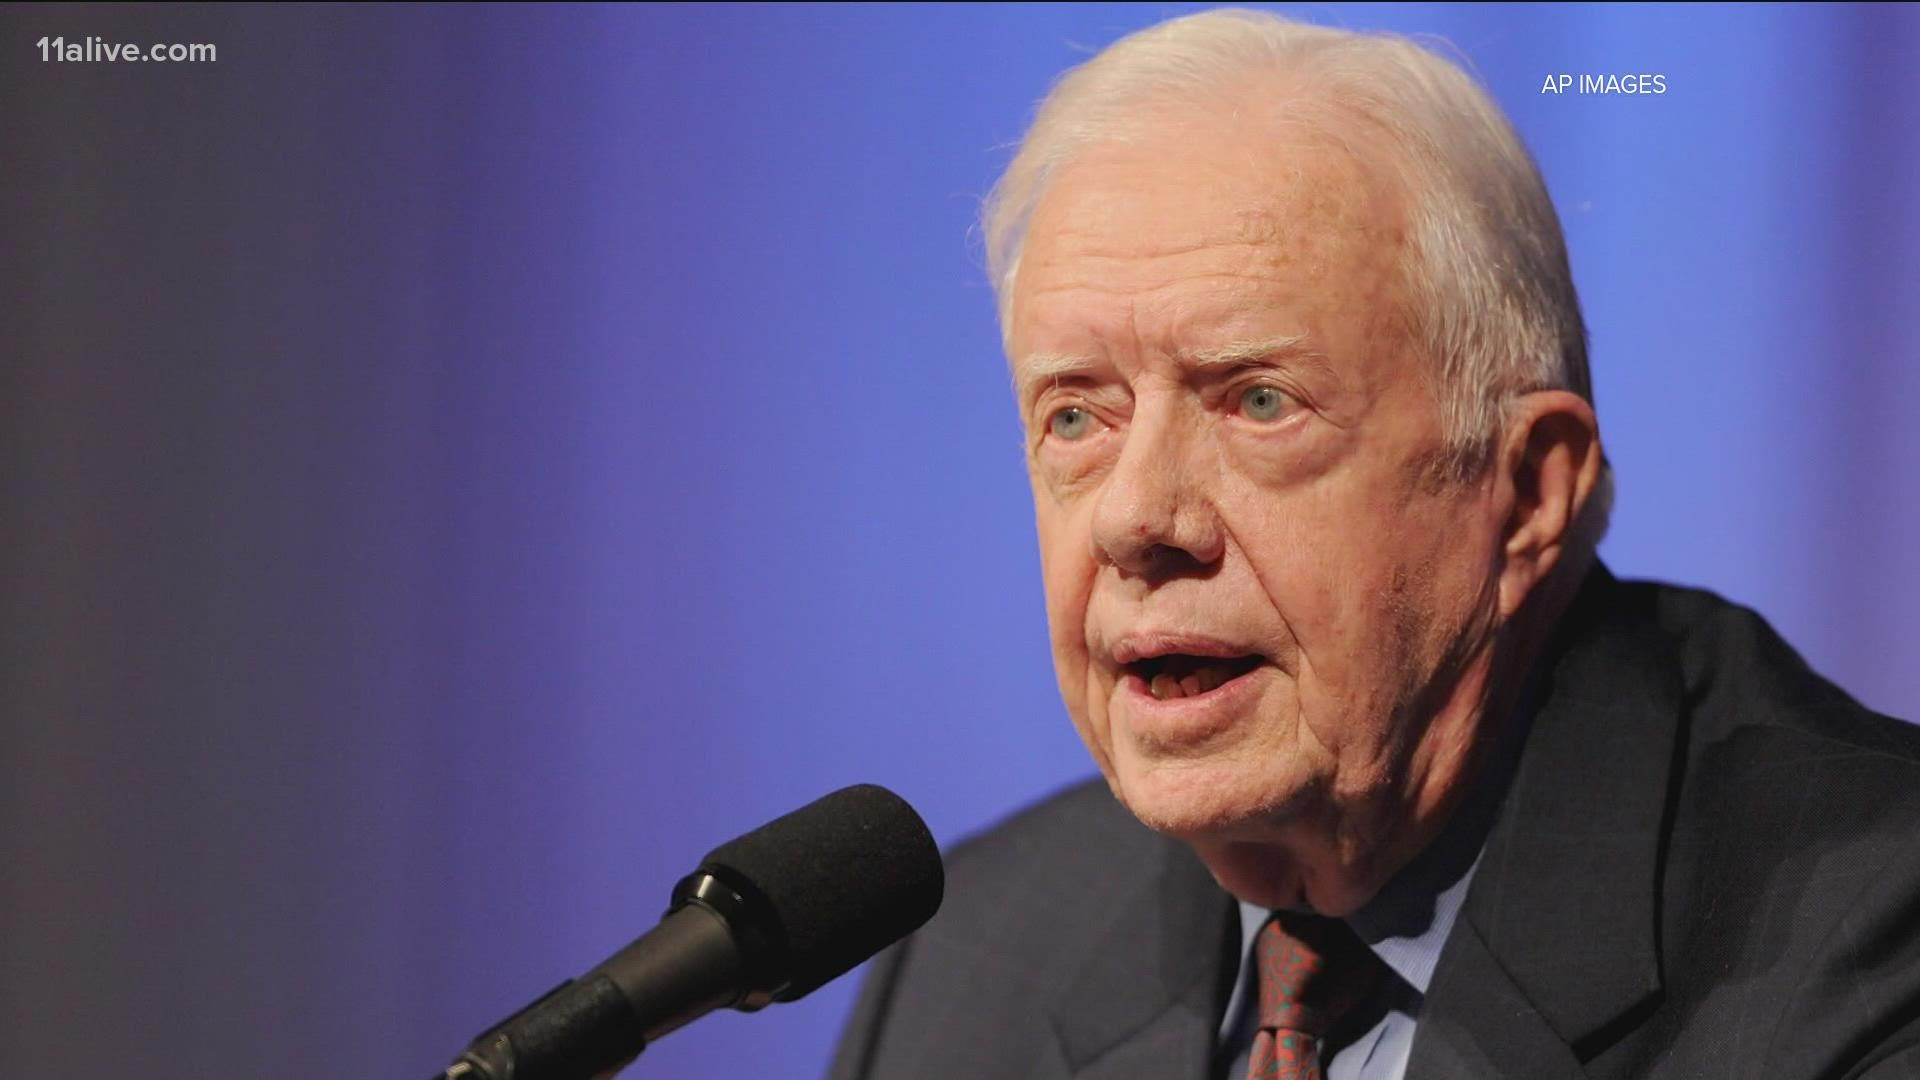 "Our great nation now teeters on the brink of a widening abyss," Carter wrote.